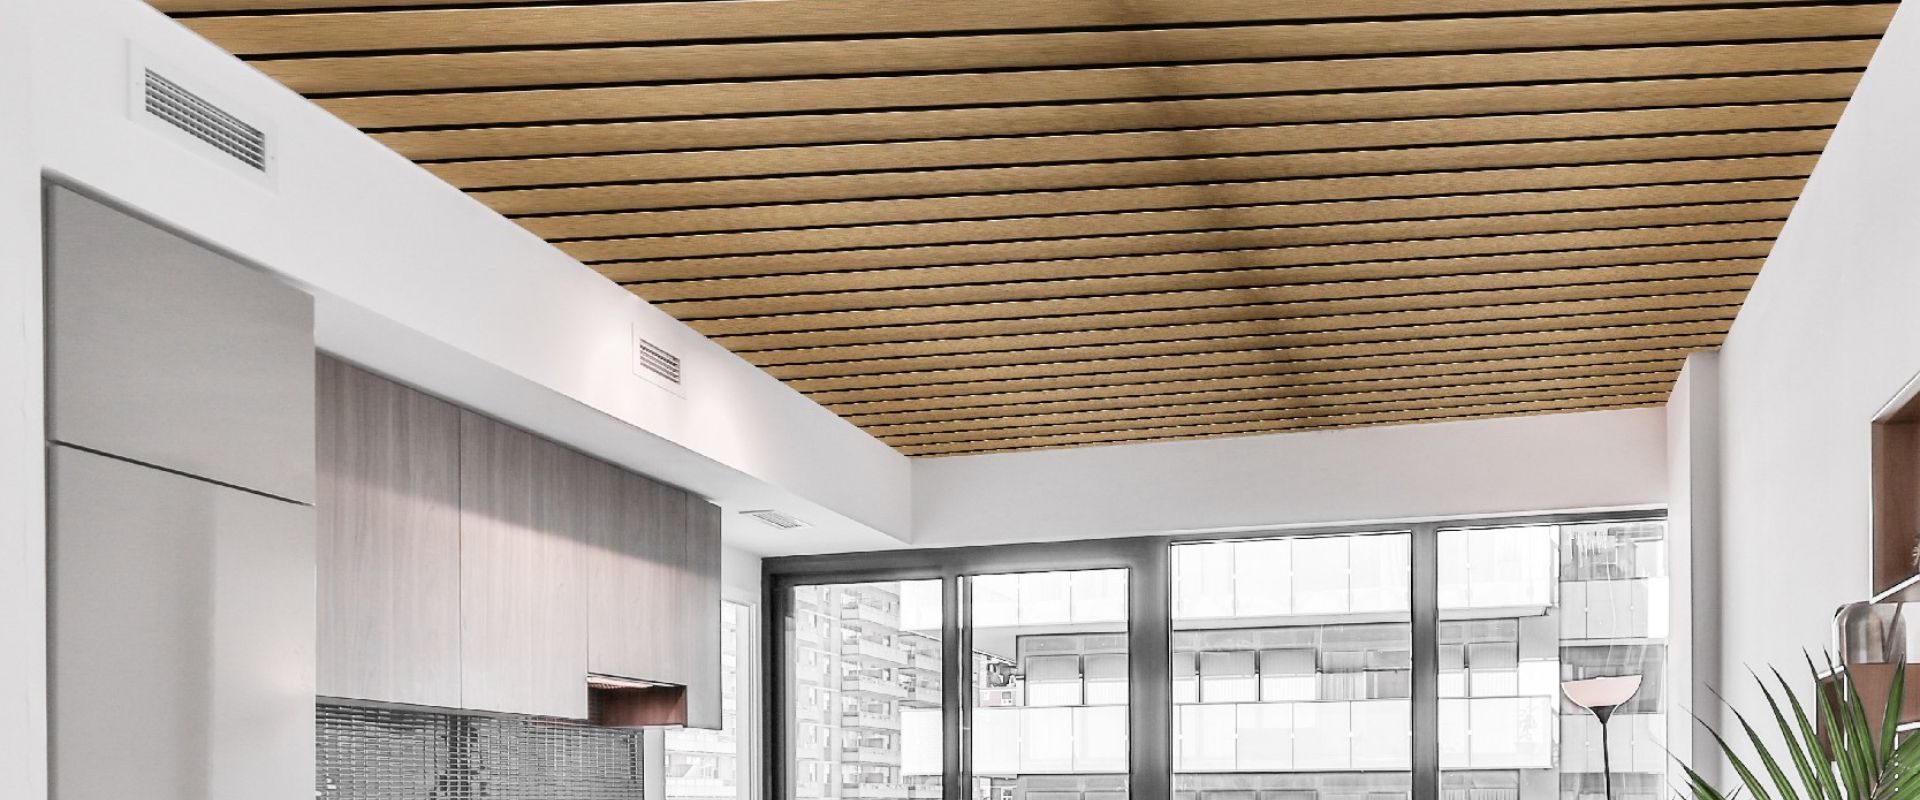 Simple Ways To Use Rafter Panels in Ceiling With Benefits